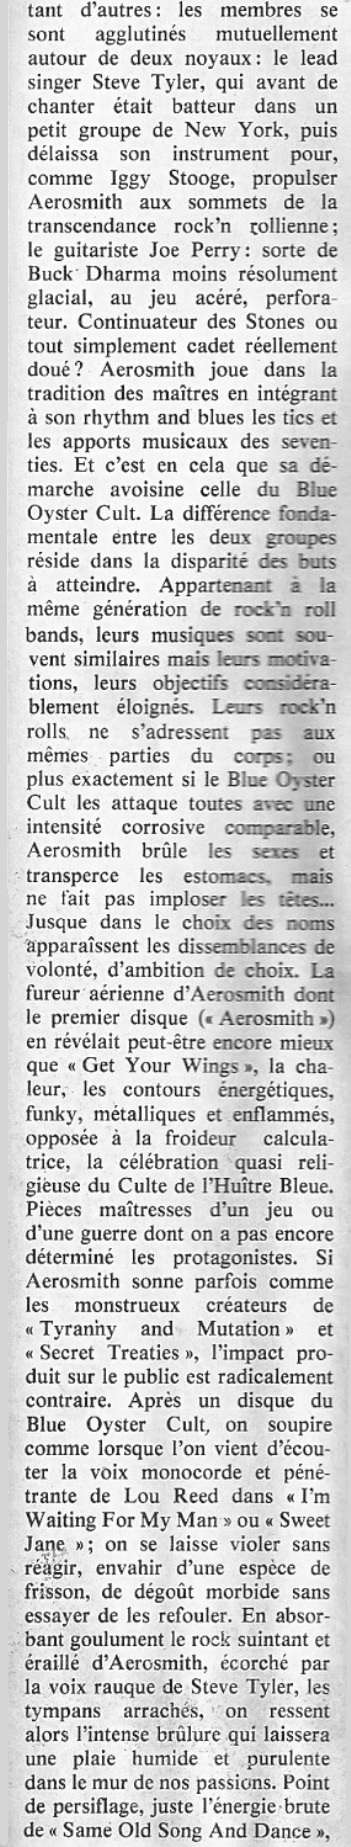 1974 - Get your wings 5110